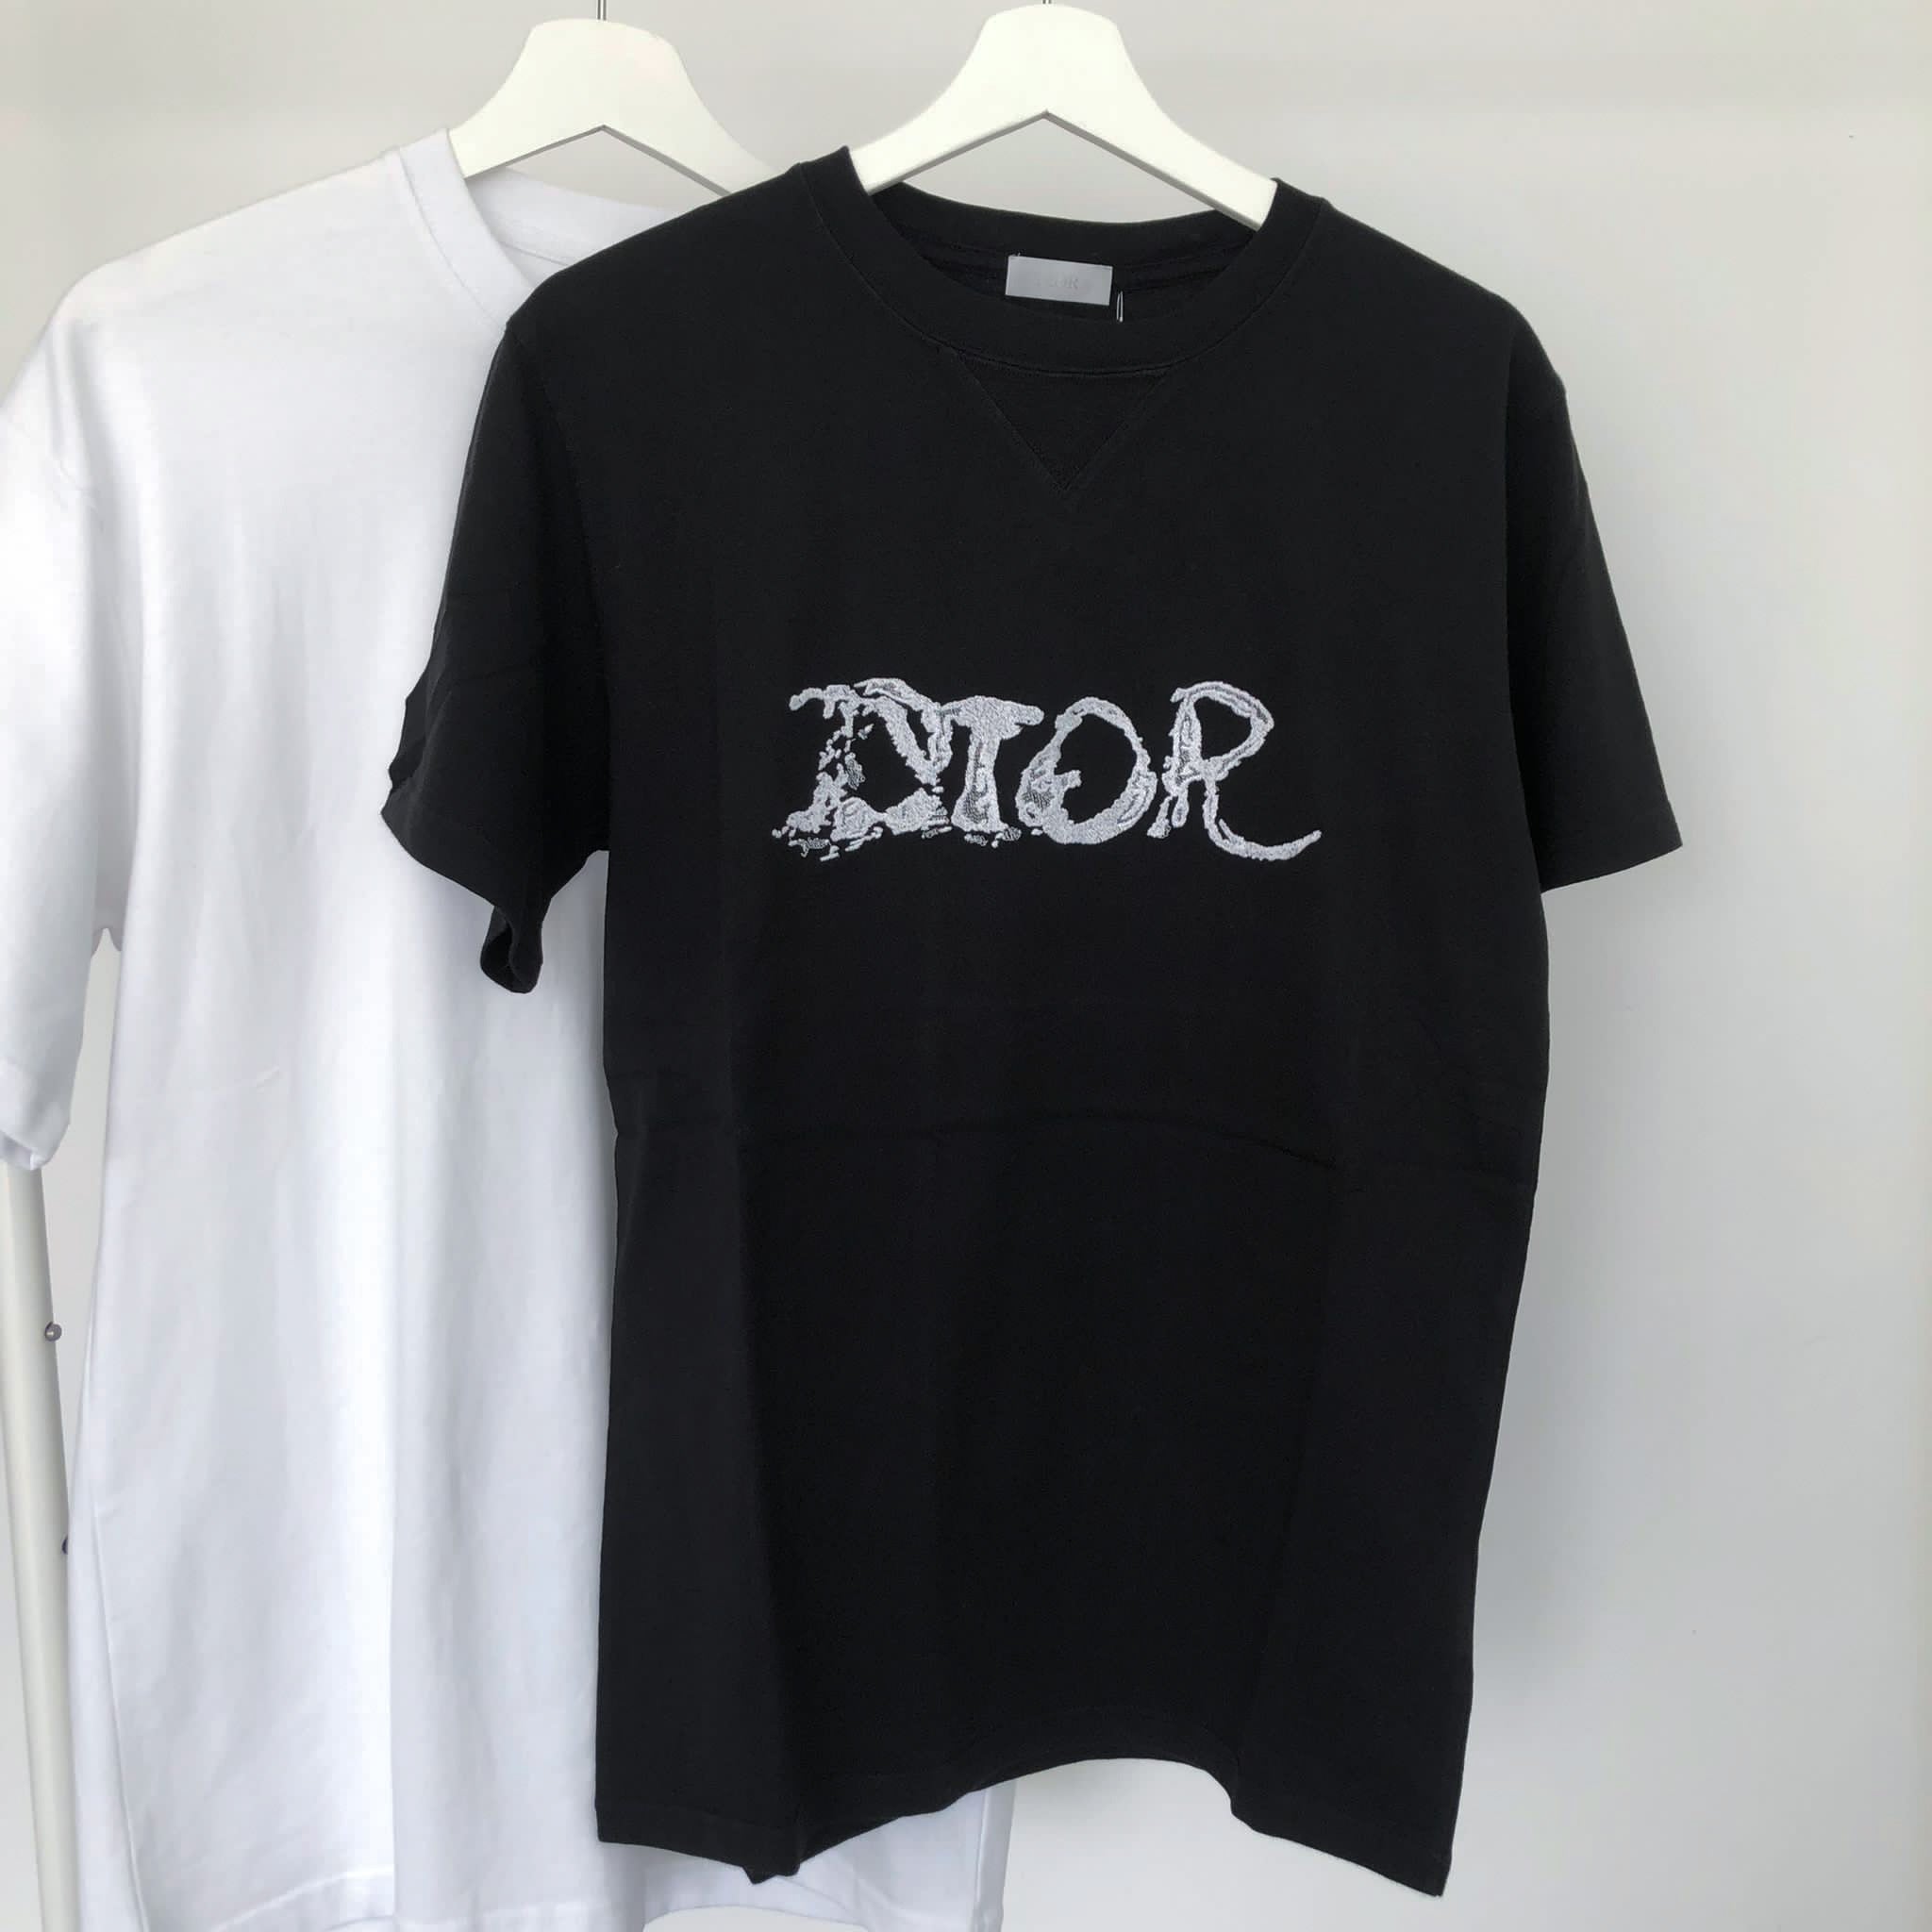 Dior x Peter Doig Embroidered Cloud Tee